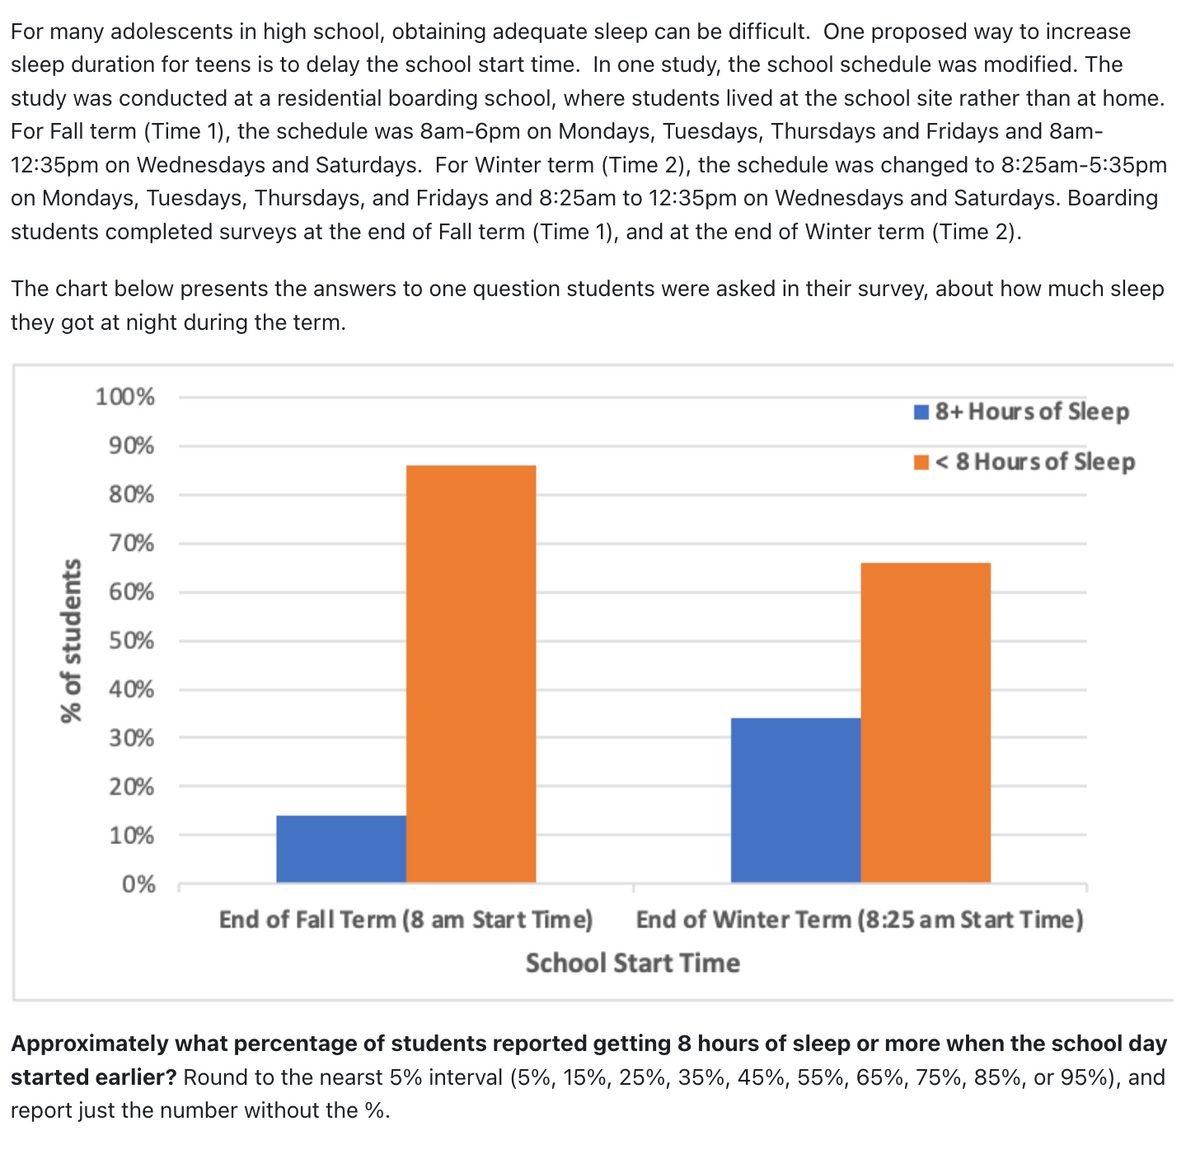 For many adolescents in high school, obtaining adequate sleep can be difficult. One proposed way to increase
sleep duration for teens is to delay the school start time. In one study, the school schedule was modified. The
study was conducted at a residential boarding school, where students lived at the school site rather than at home.
For Fall term (Time 1), the schedule was 8am-6pm on Mondays, Tuesdays, Thursdays and Fridays and 8am-
12:35pm on Wednesdays and Saturdays. For Winter term (Time 2), the schedule was changed to 8:25am-5:35pm
on Mondays, Tuesdays, Thursdays, and Fridays and 8:25am to 12:35pm on Wednesdays and Saturdays. Boarding
students completed surveys at the end of Fall term (Time 1), and at the end of Winter term (Time 2).
The chart below presents the answers to one question students were asked in their survey, about how much sleep
they got at night during the term.
% of students
100%
90%
80%
70%
60%
50%
40%
30%
20%
10%
0%
End of Fall Term (8 am Start Time)
18+ Hours of Sleep
■< 8 Hours of Sleep
End of Winter Term (8:25 am Start Time)
School Start Time
Approximately what percentage of students reported getting 8 hours of sleep or more when the school day
started earlier? Round to the nearst 5% interval (5%, 15%, 25%, 35%, 45%, 55%, 65%, 75%, 85%, or 95%), and
report just the number without the %.